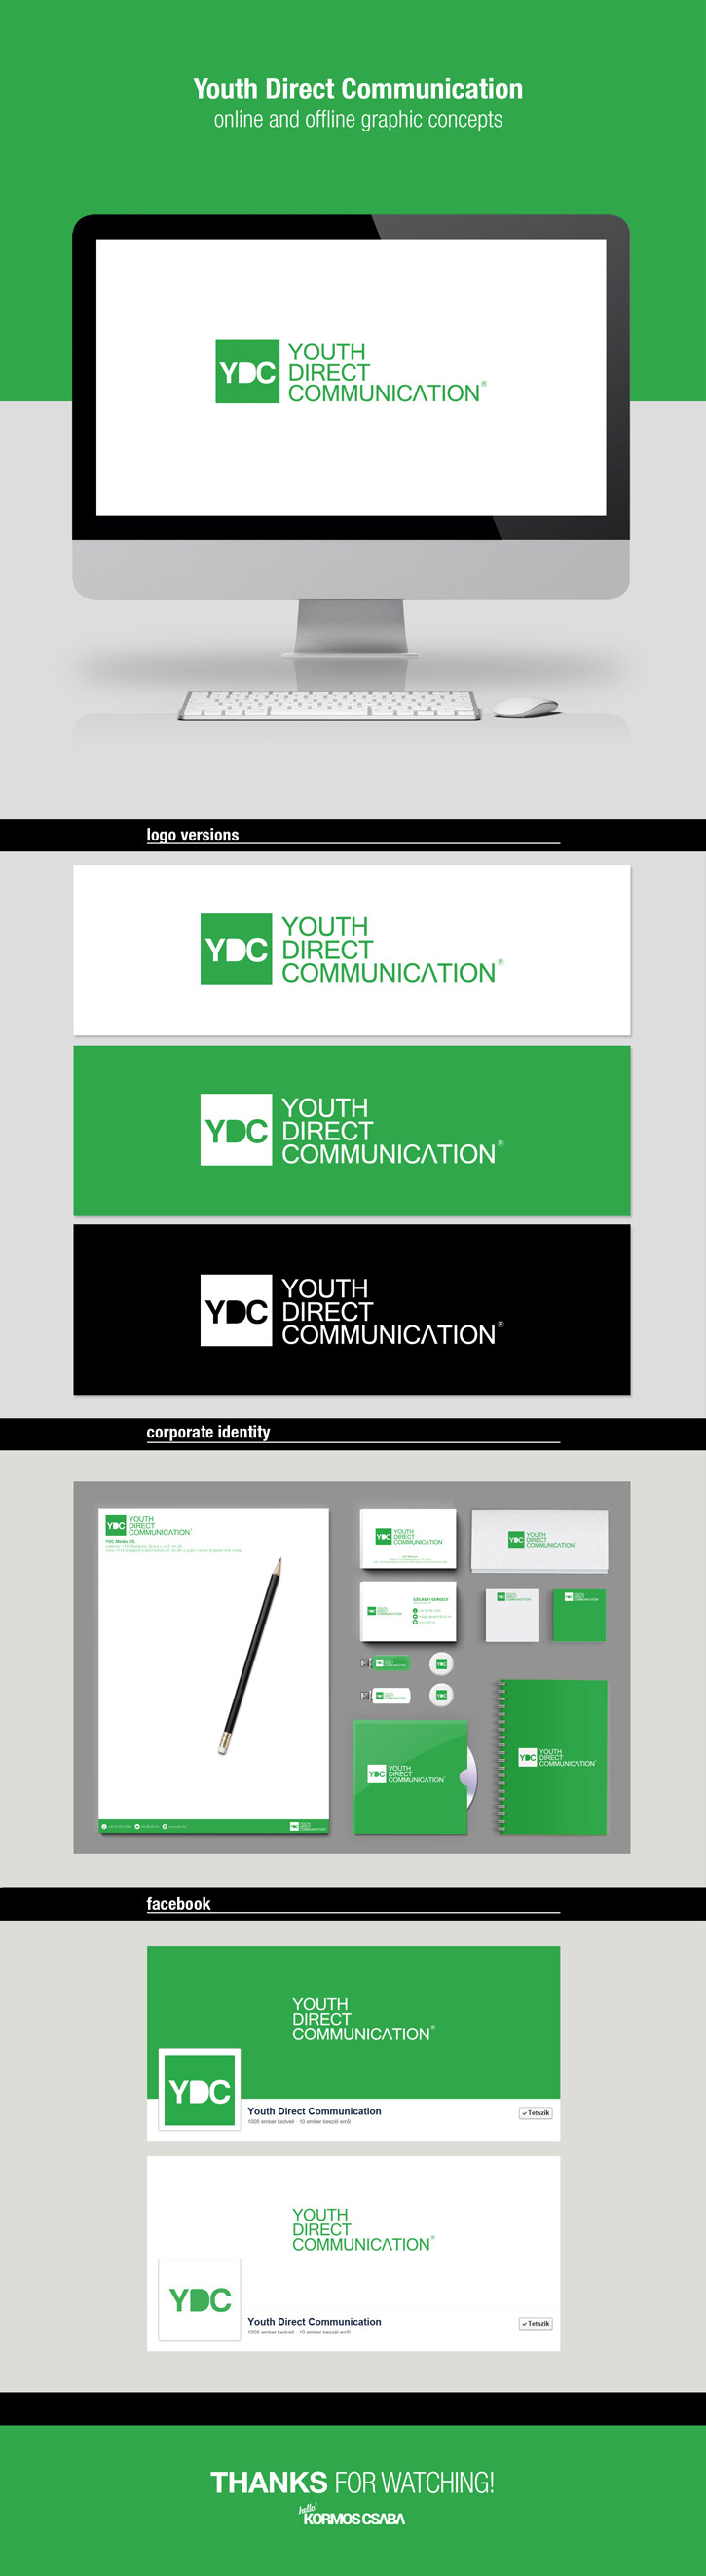 YDC youth Direct communication corporate identity brand marketing   logo business card green